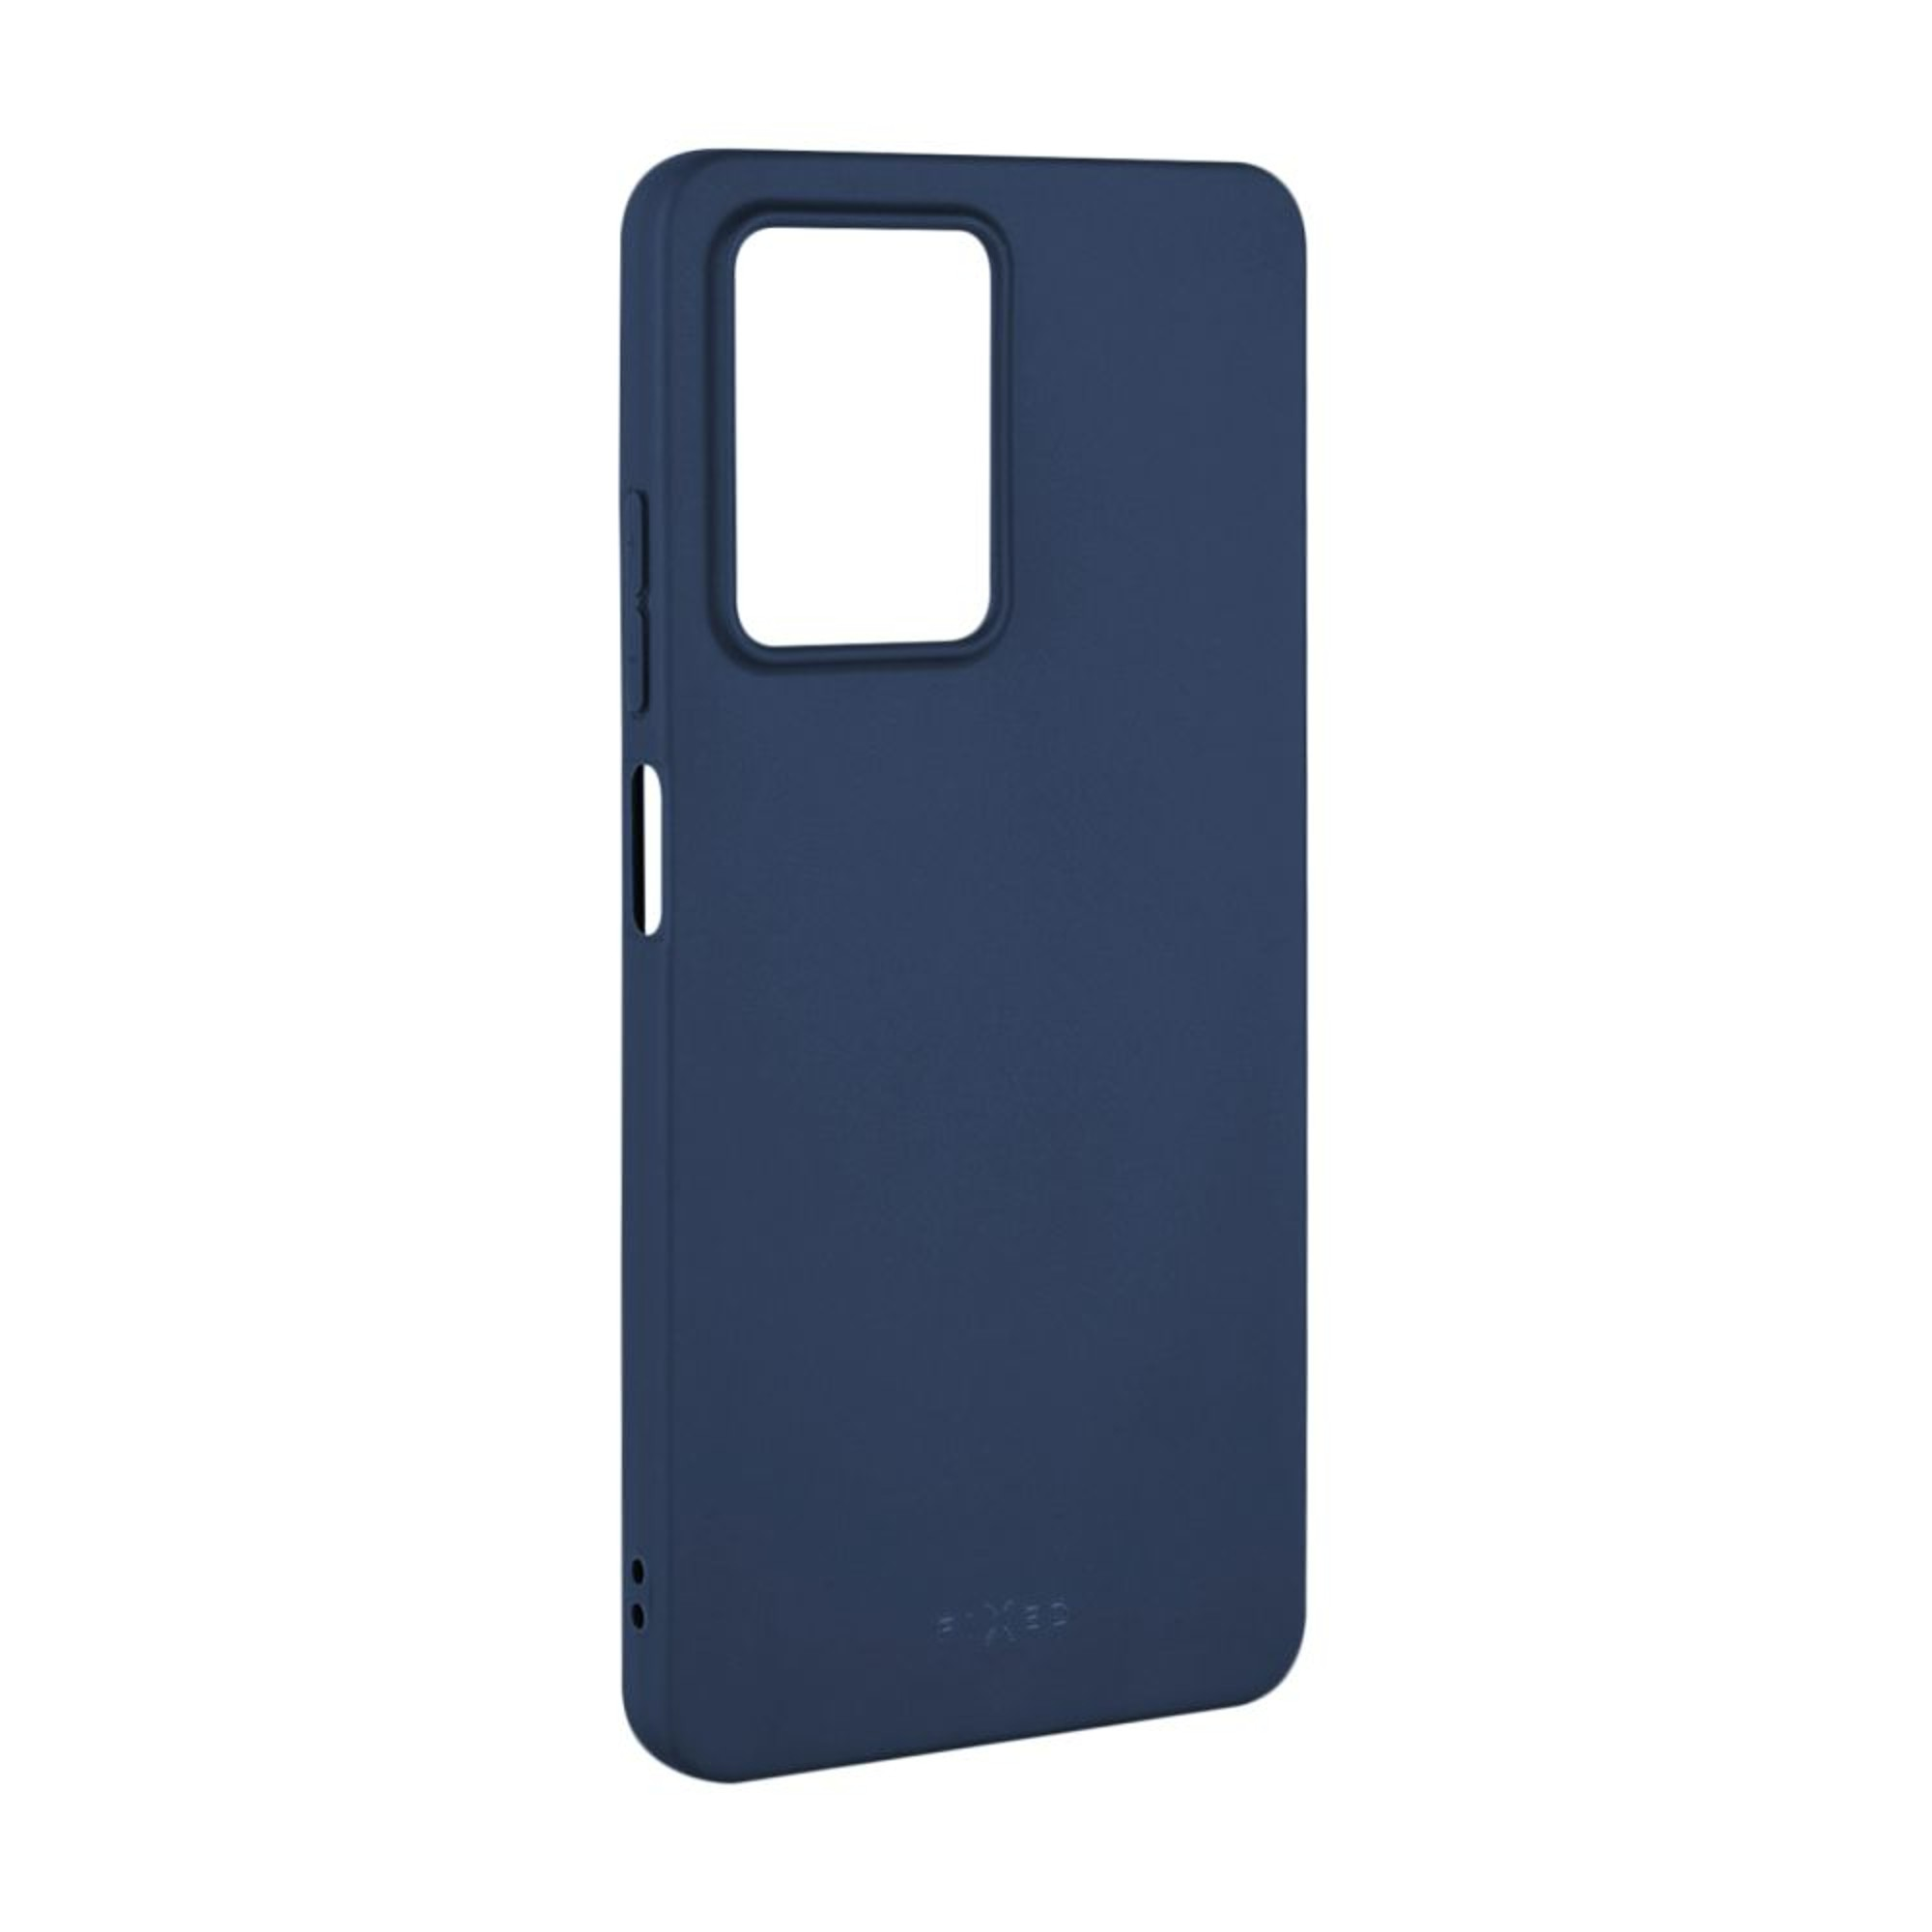 FIXED Story Soft-Touch Backcover, Xiaomi, X5 POCO Blau 5G, FIXST-1101-BL, Pro